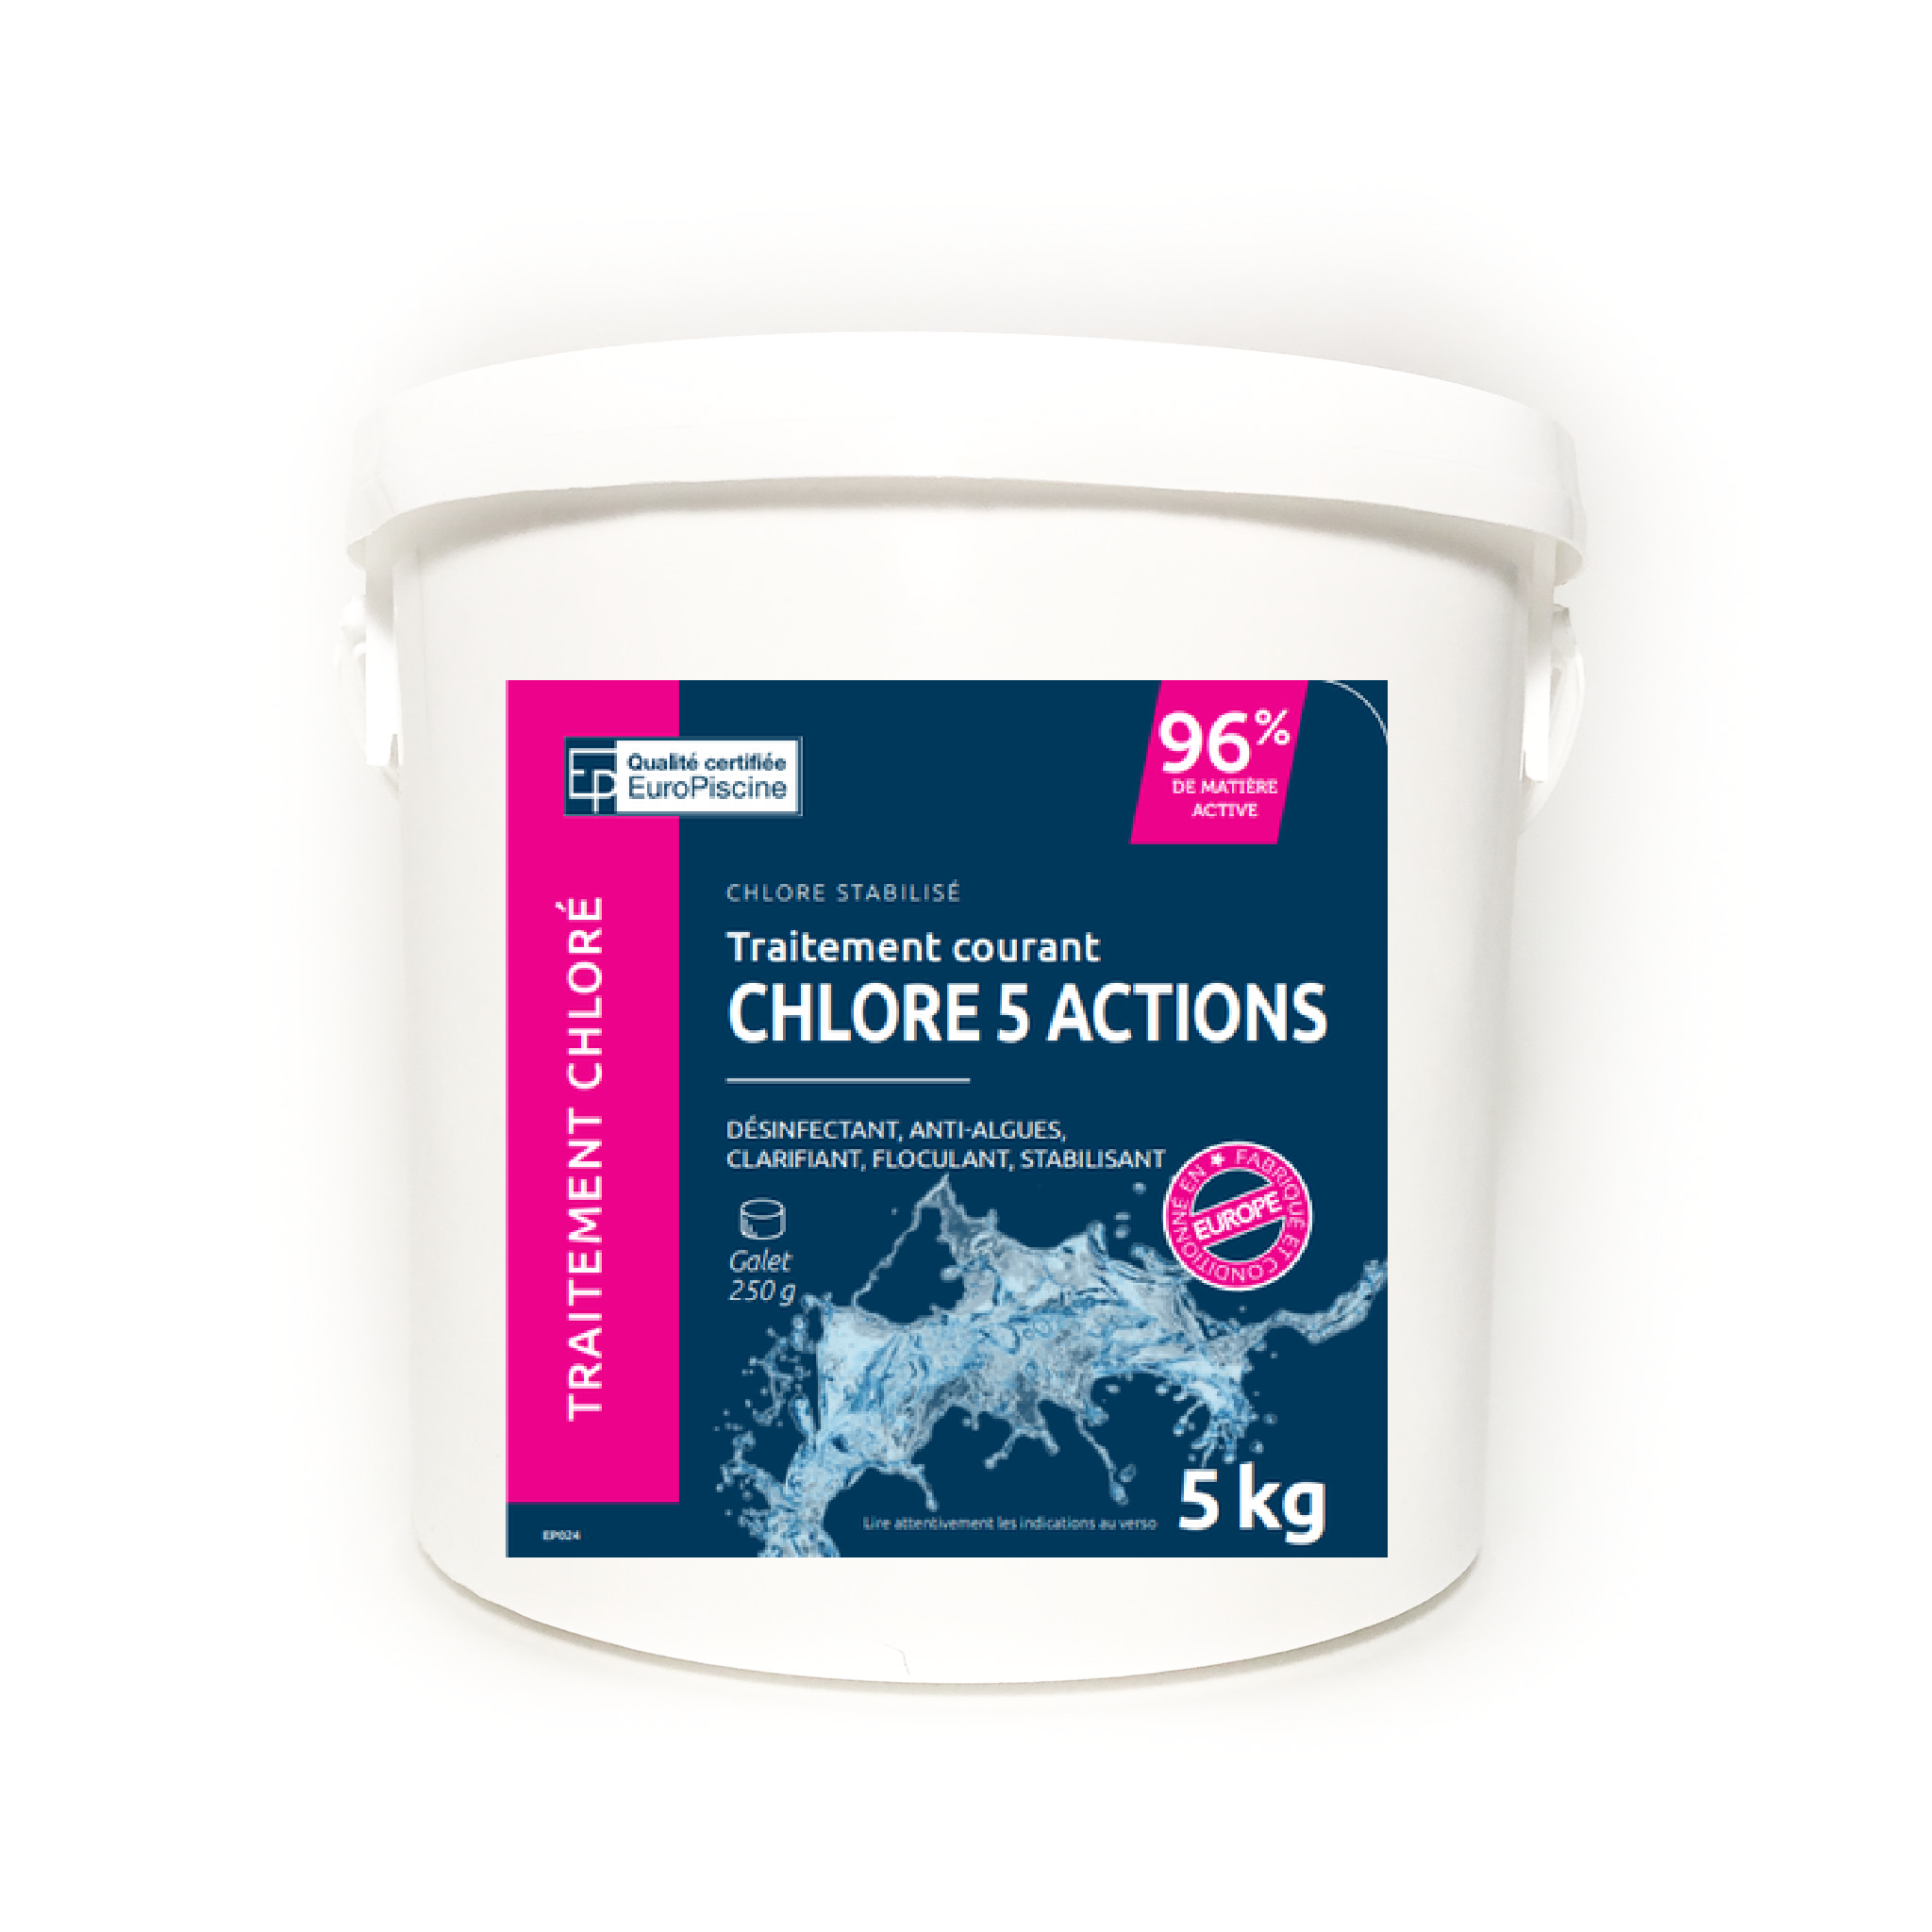 CHLORE 5 ACTIONS - 5 kg